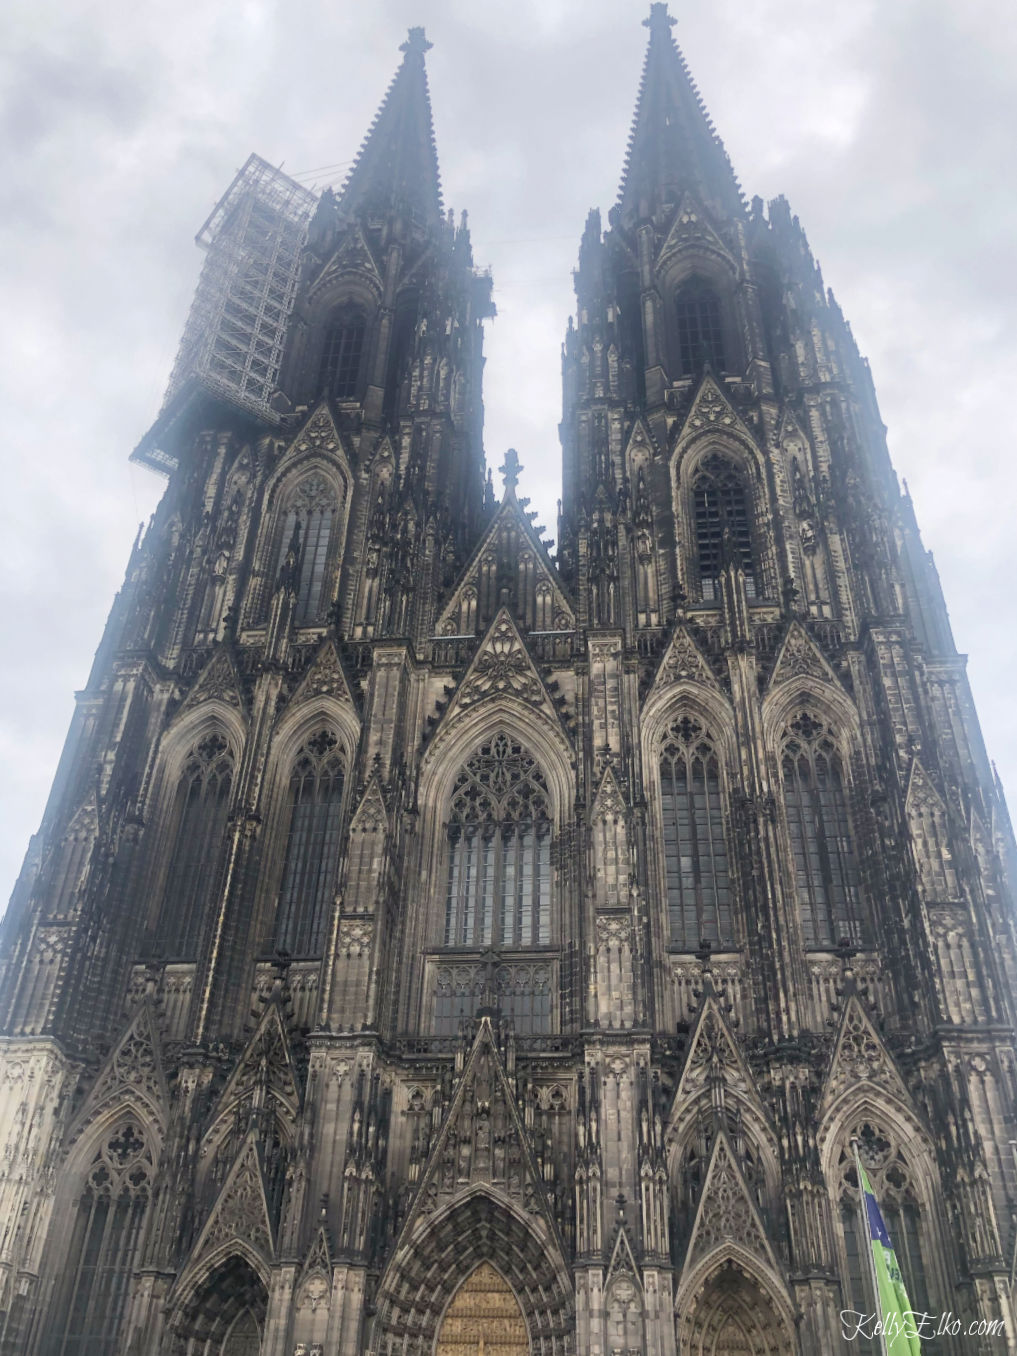 the massive Cologne Cathedral in Cologne Germany is a UNESCO World Heritage site kellyelko.com #colognegermany #colognecathedral #travel #rhineriver #travelblogger #europevacation